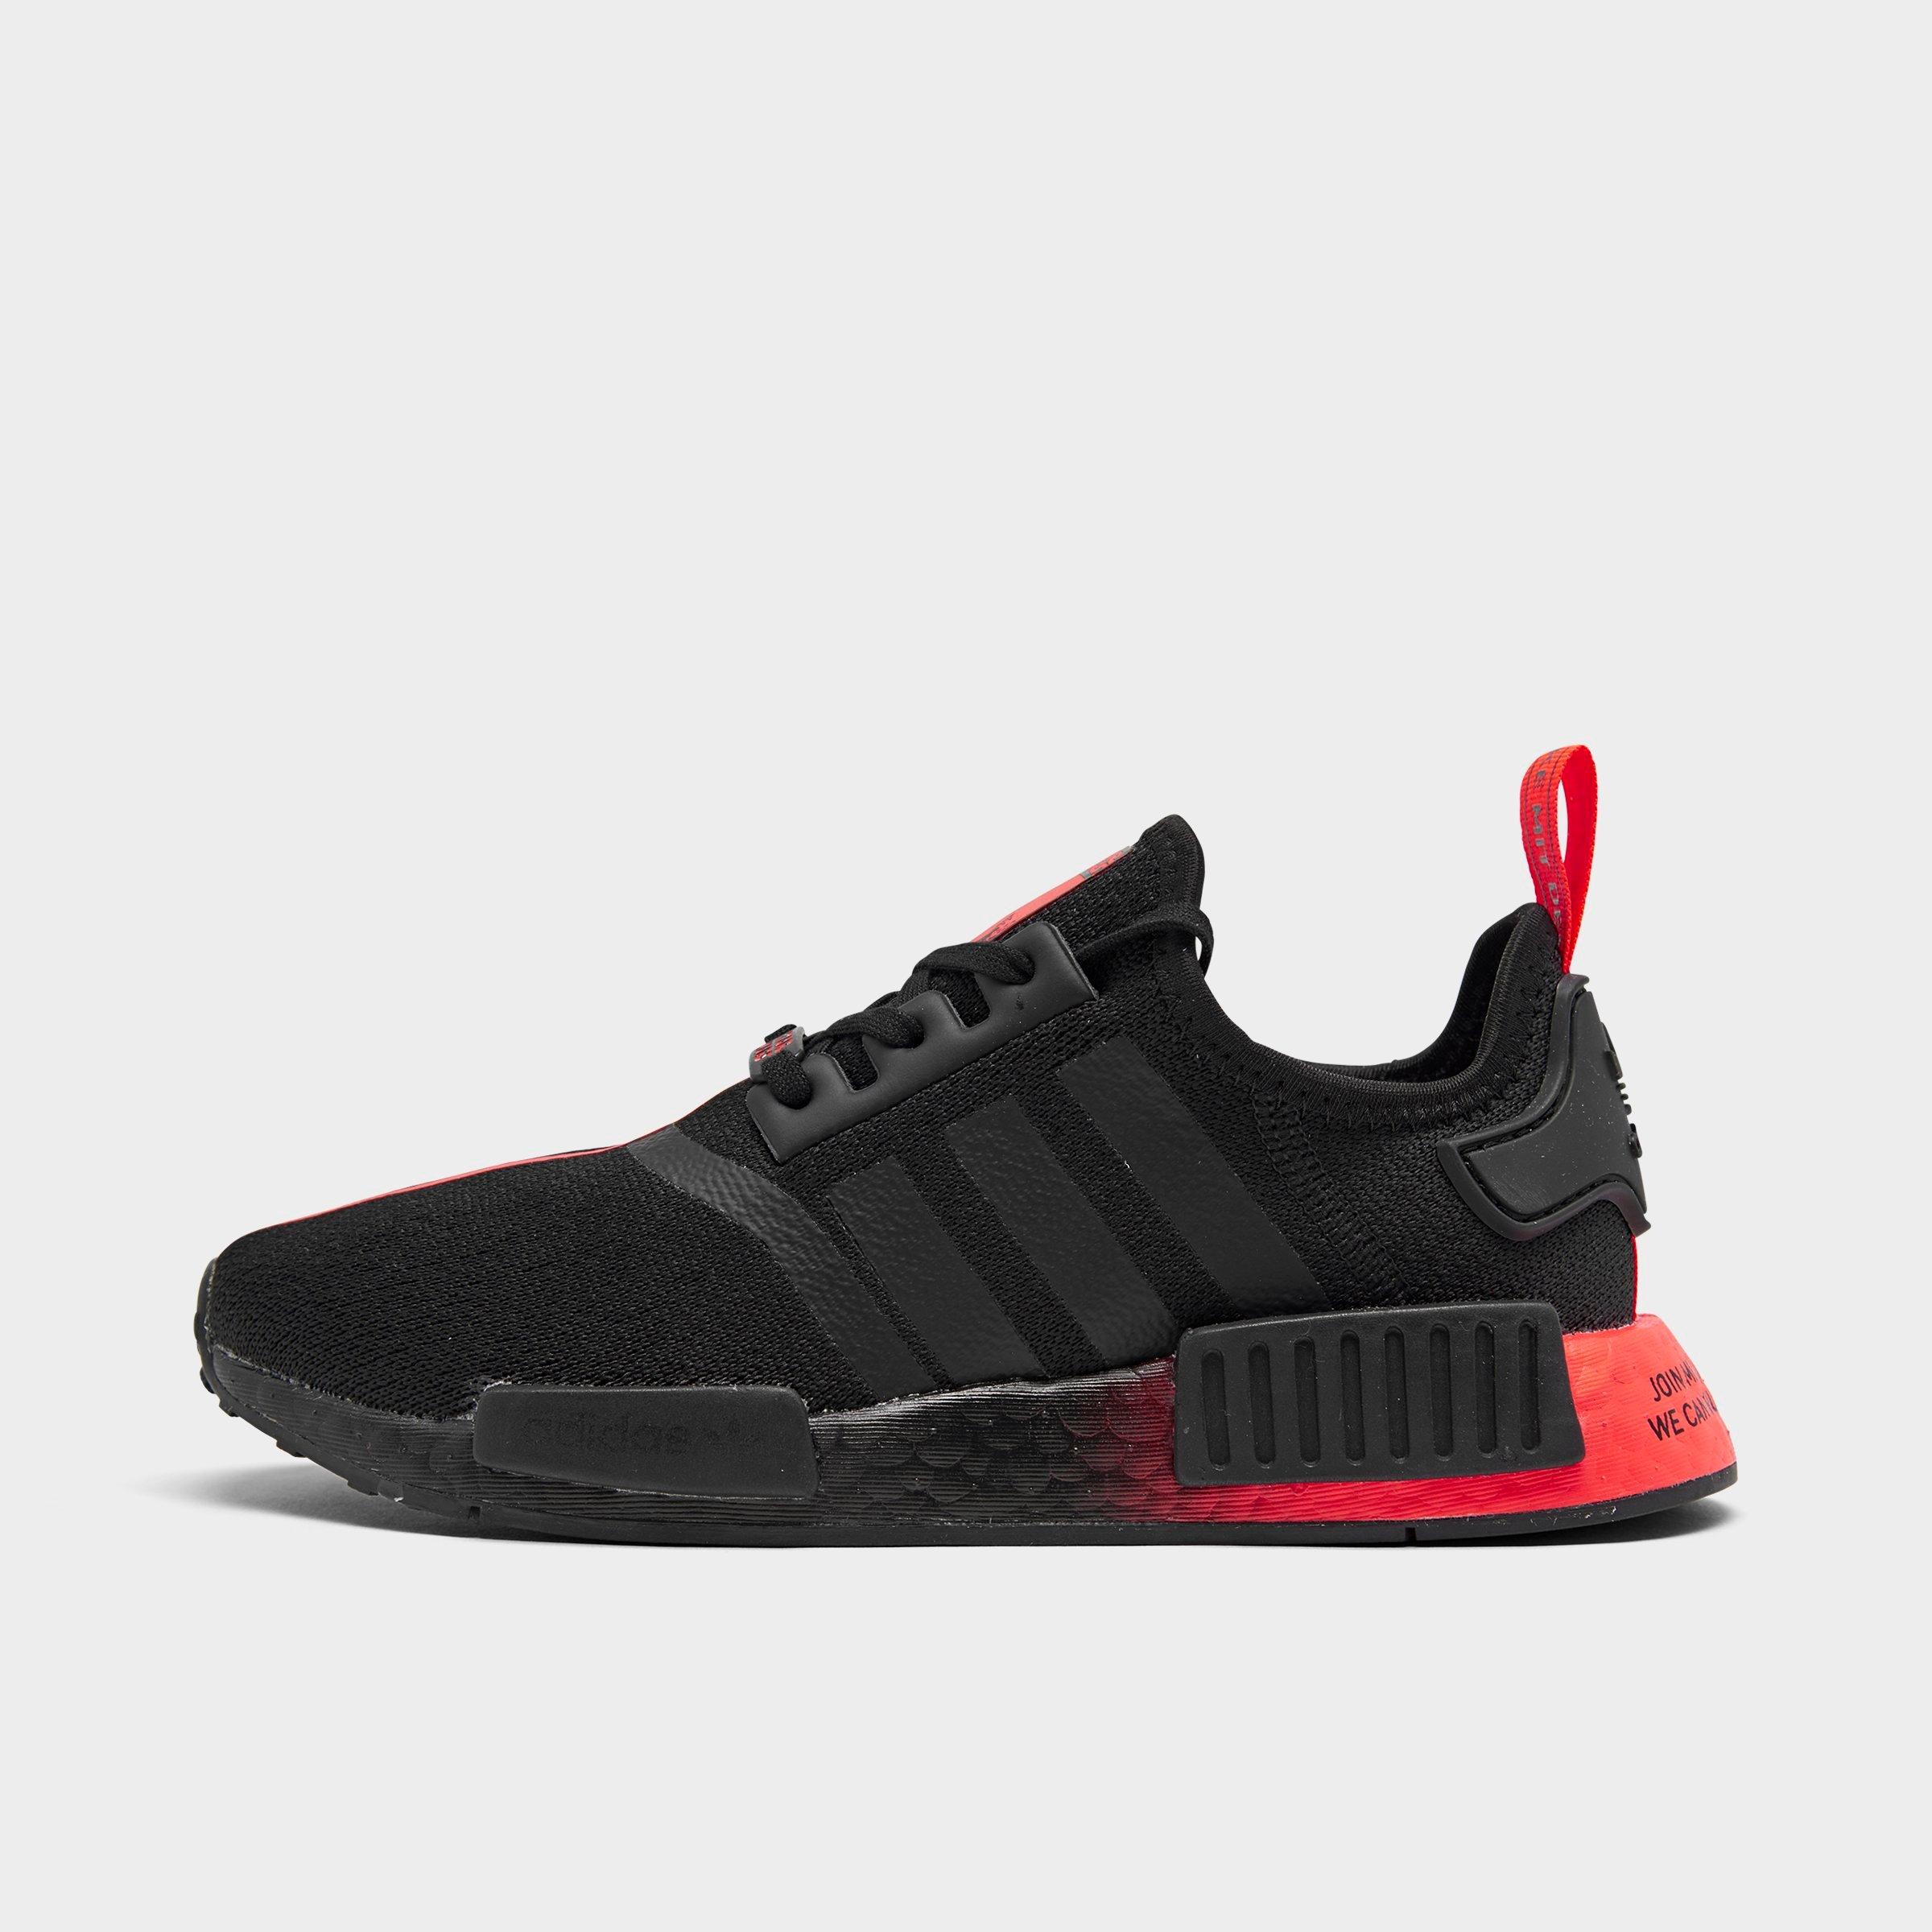 The Perfect ADIDAS NMD R1 Mens Shoes 006267 S81881 X70b7552